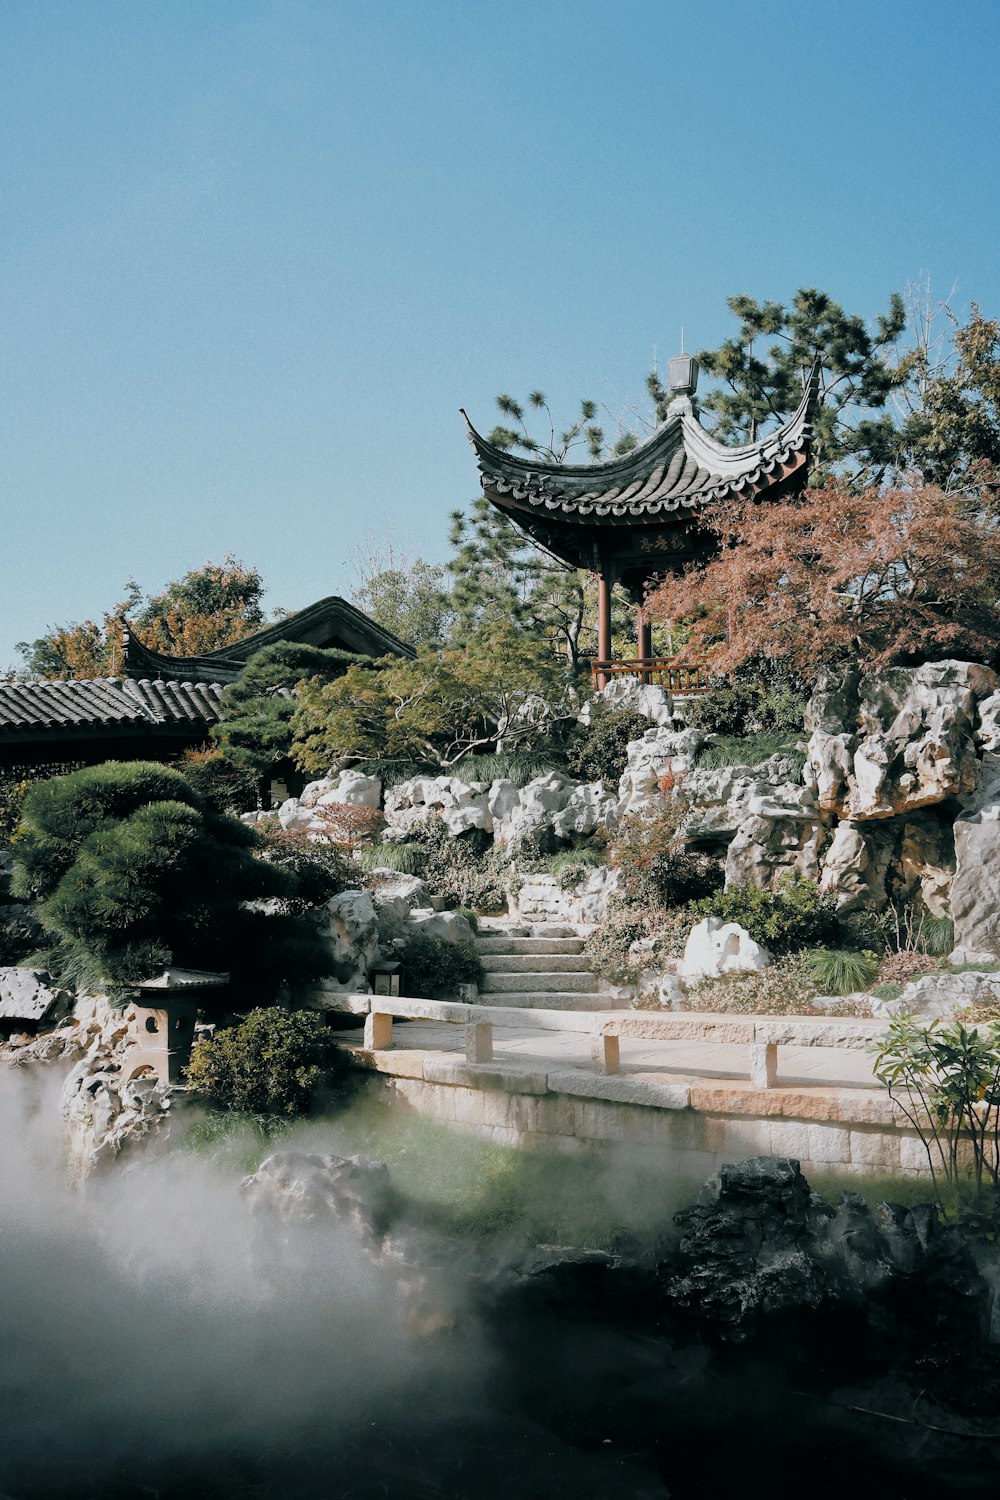 a scenic view of a chinese garden with a pagoda in the background